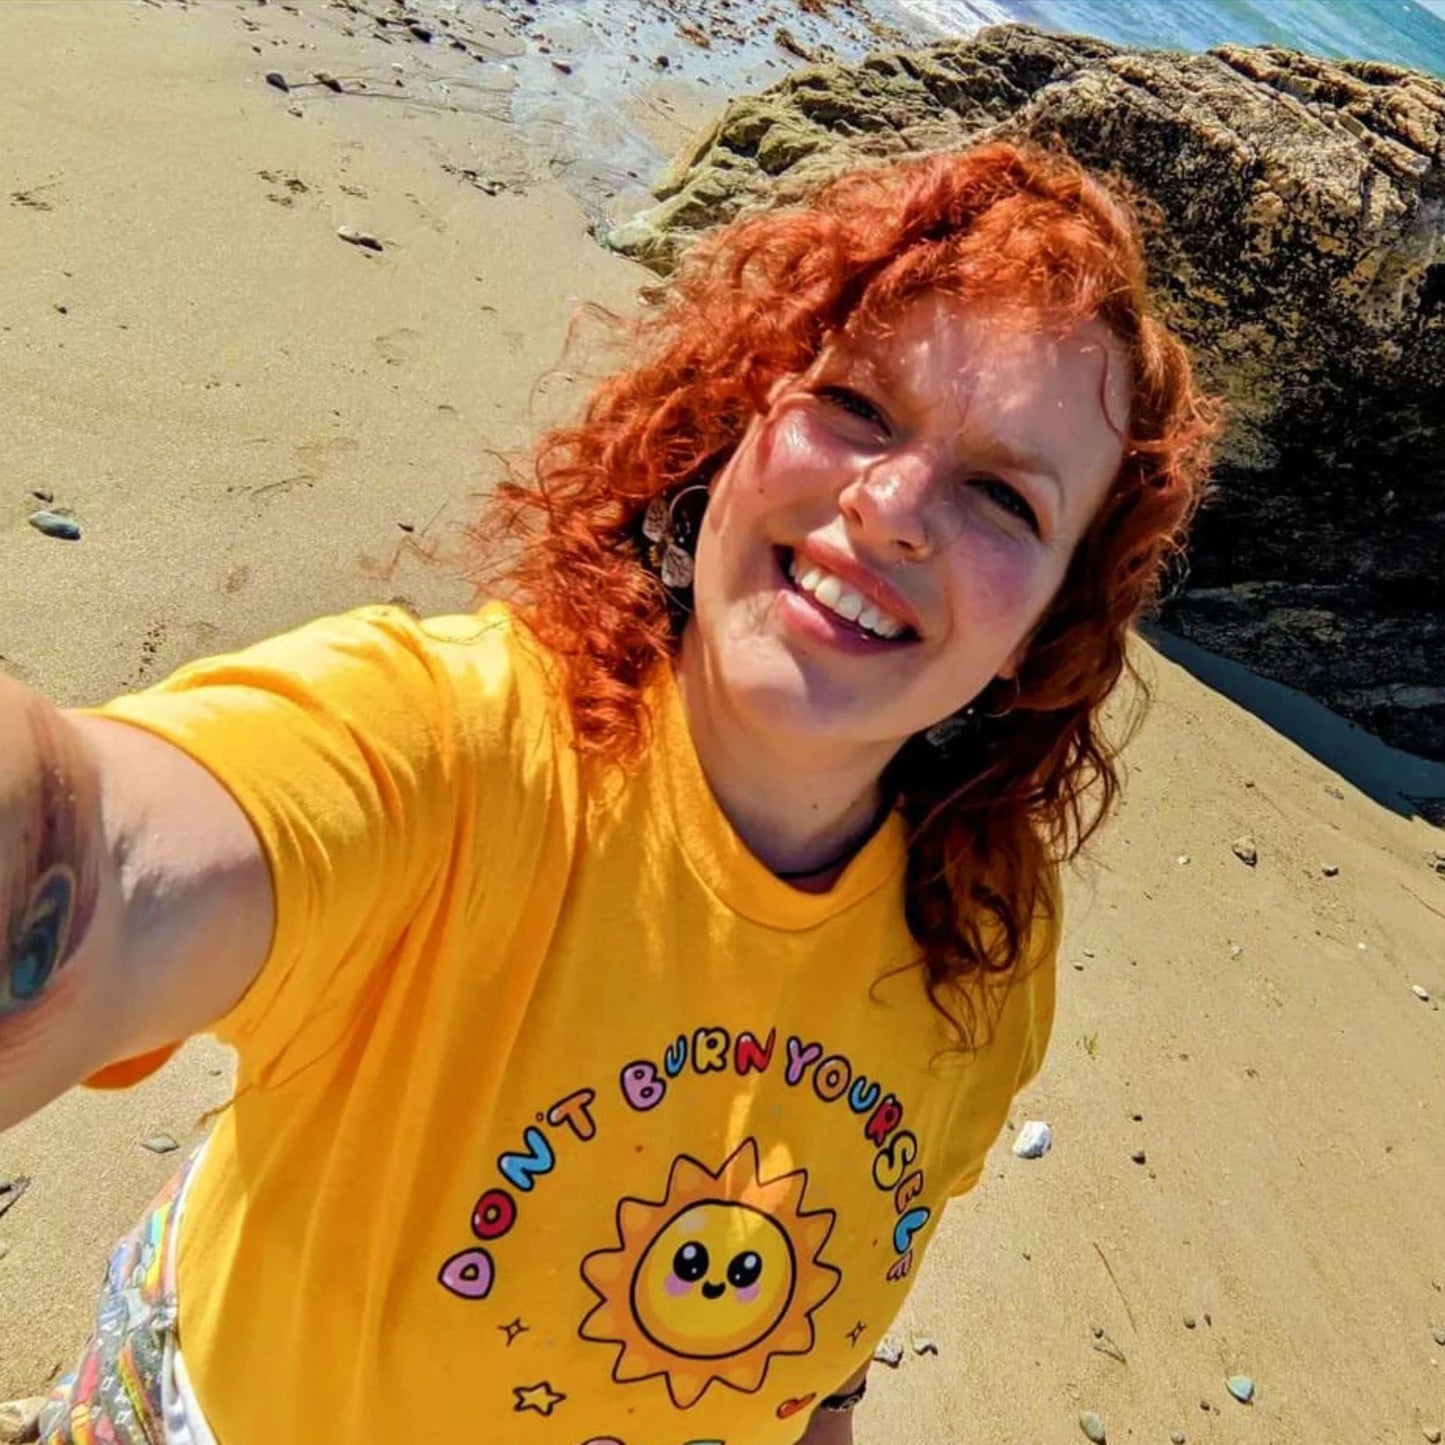 The Don't Burn Yourself Out Tee being worn by a smiling customer with red curly hair taking a selfie on a sandy sunny beach. The yellow base cotton tshirt features a smiling happy sunshine with red, yellow and blue polka dots, a red heart, a yellow star and black sparkles surrounding it. Around the sunshine in rainbow bubble writing reads 'don't burn yourself out'. The design is a gentle reminder to practise self care.